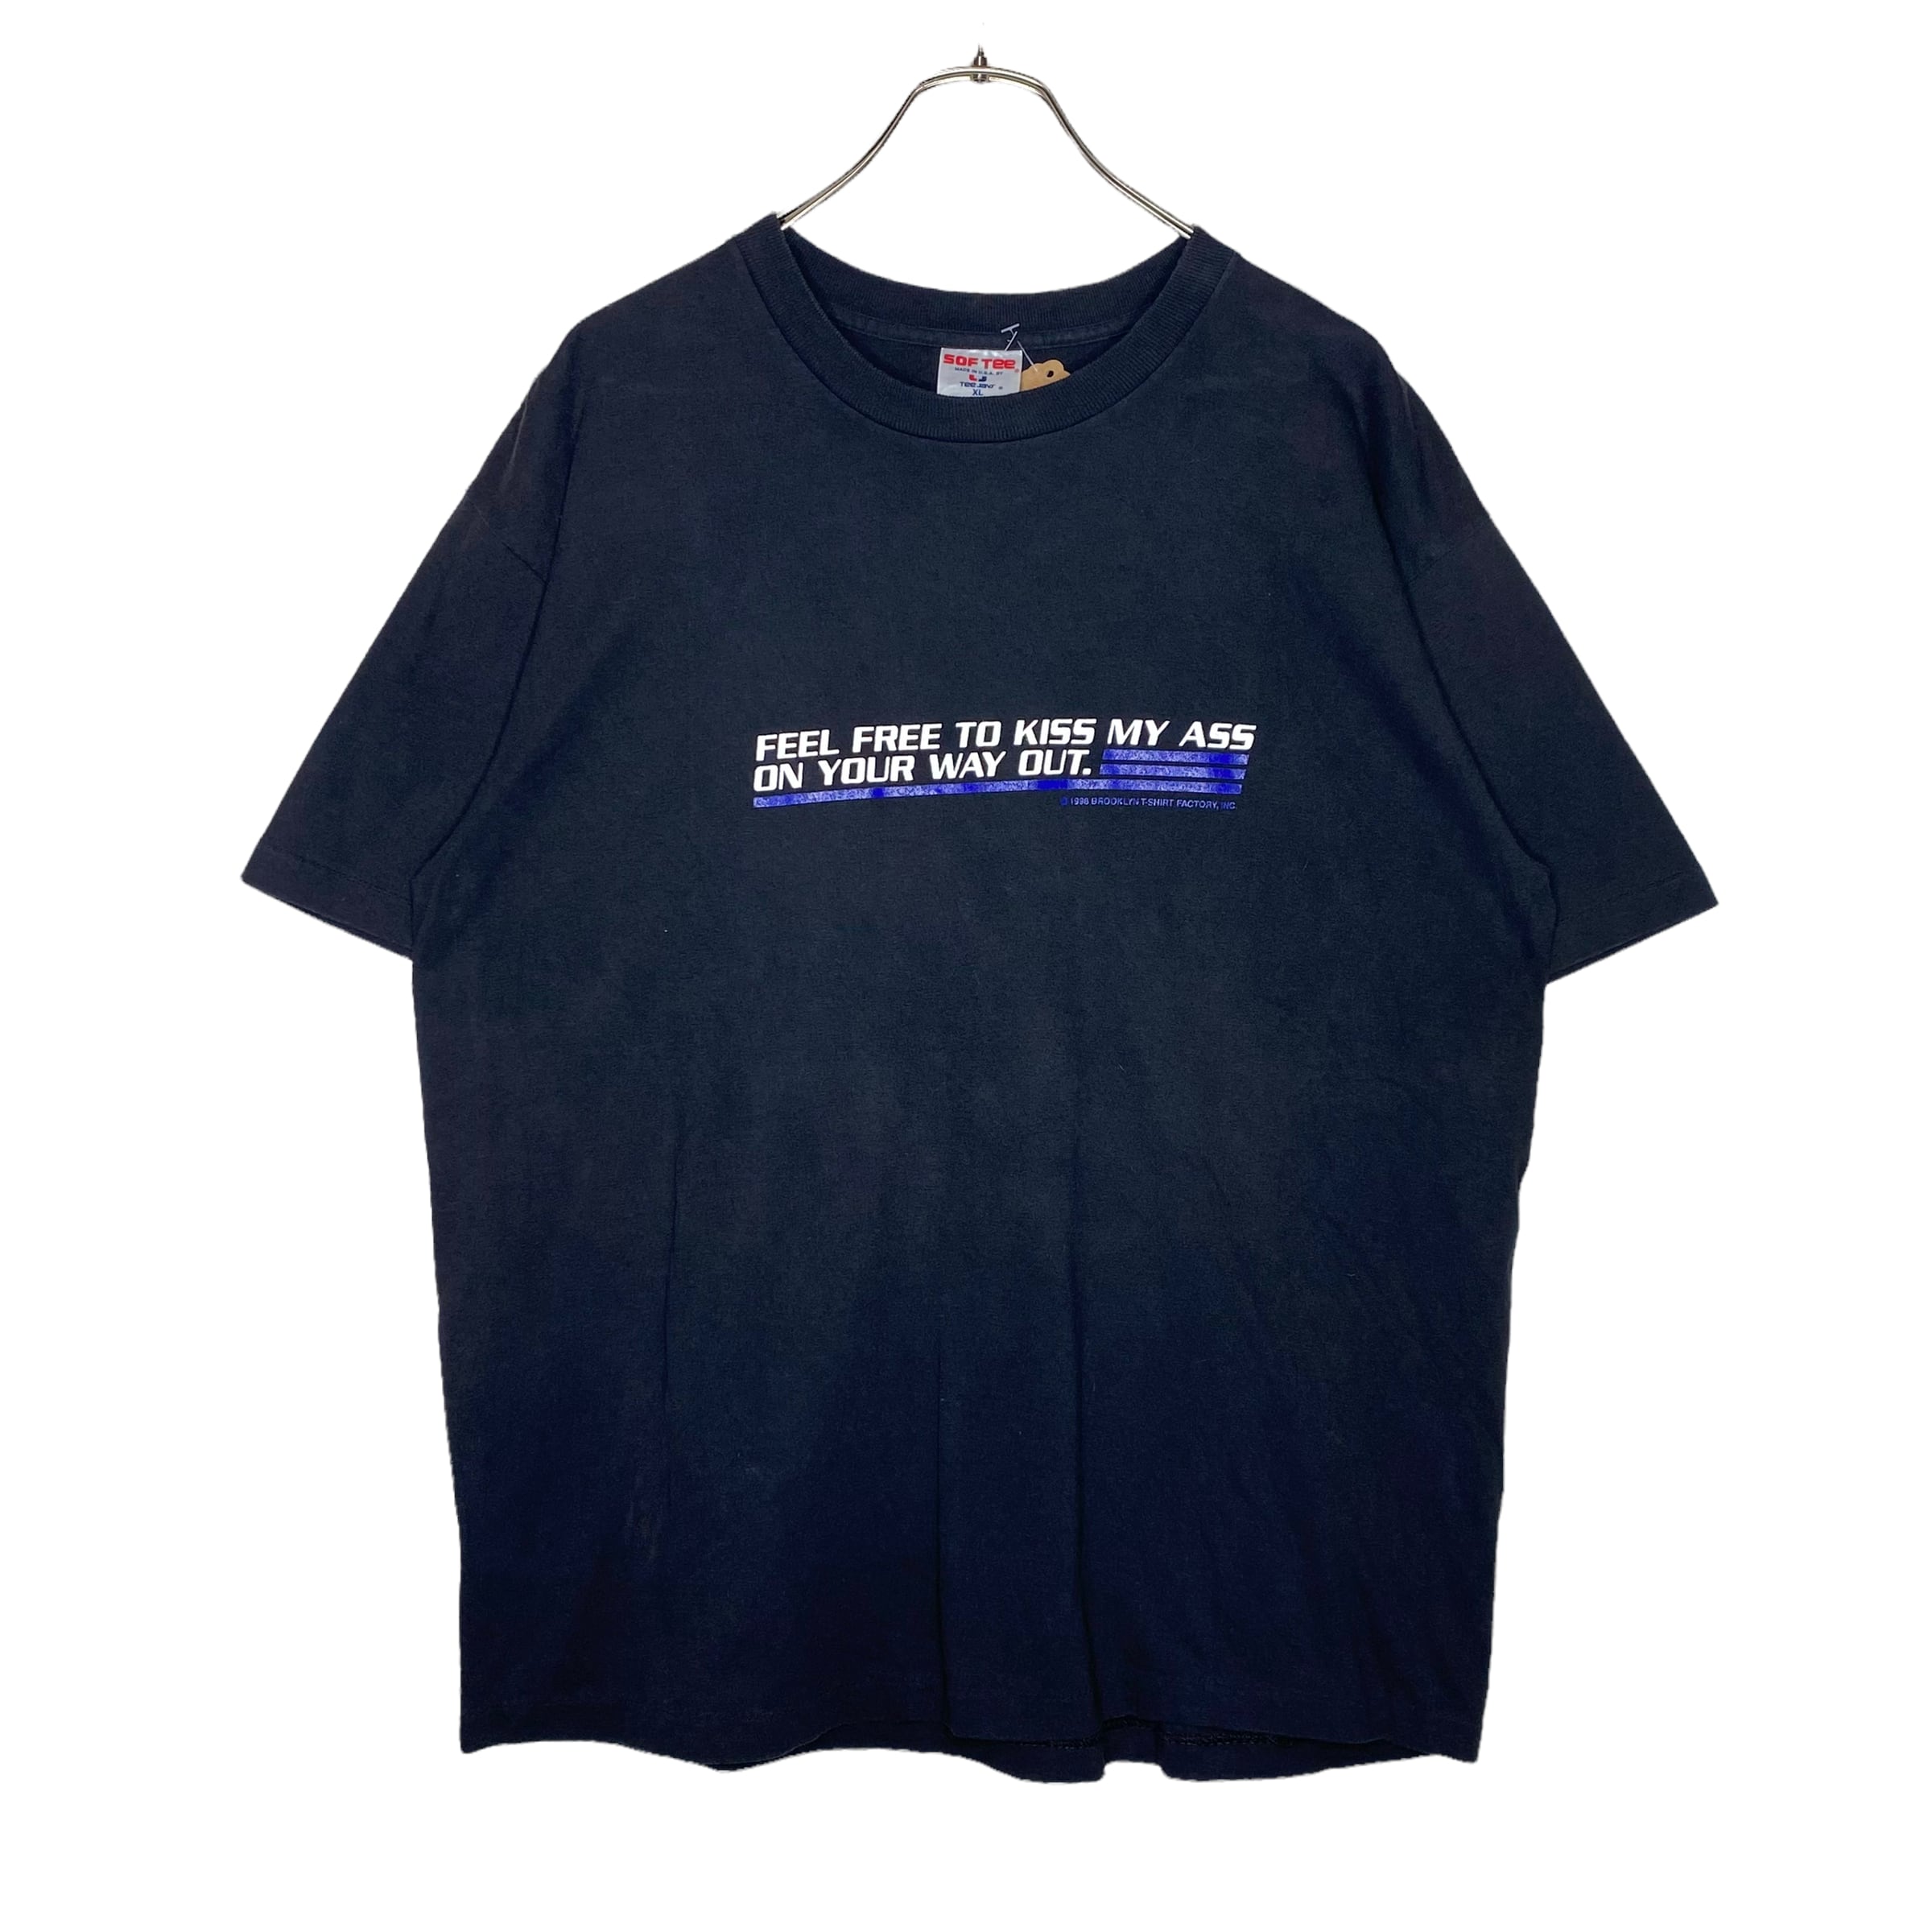 Made in USA】SOF TEE 半袖Tシャツ XL プリント | 古着屋OLDGREEN